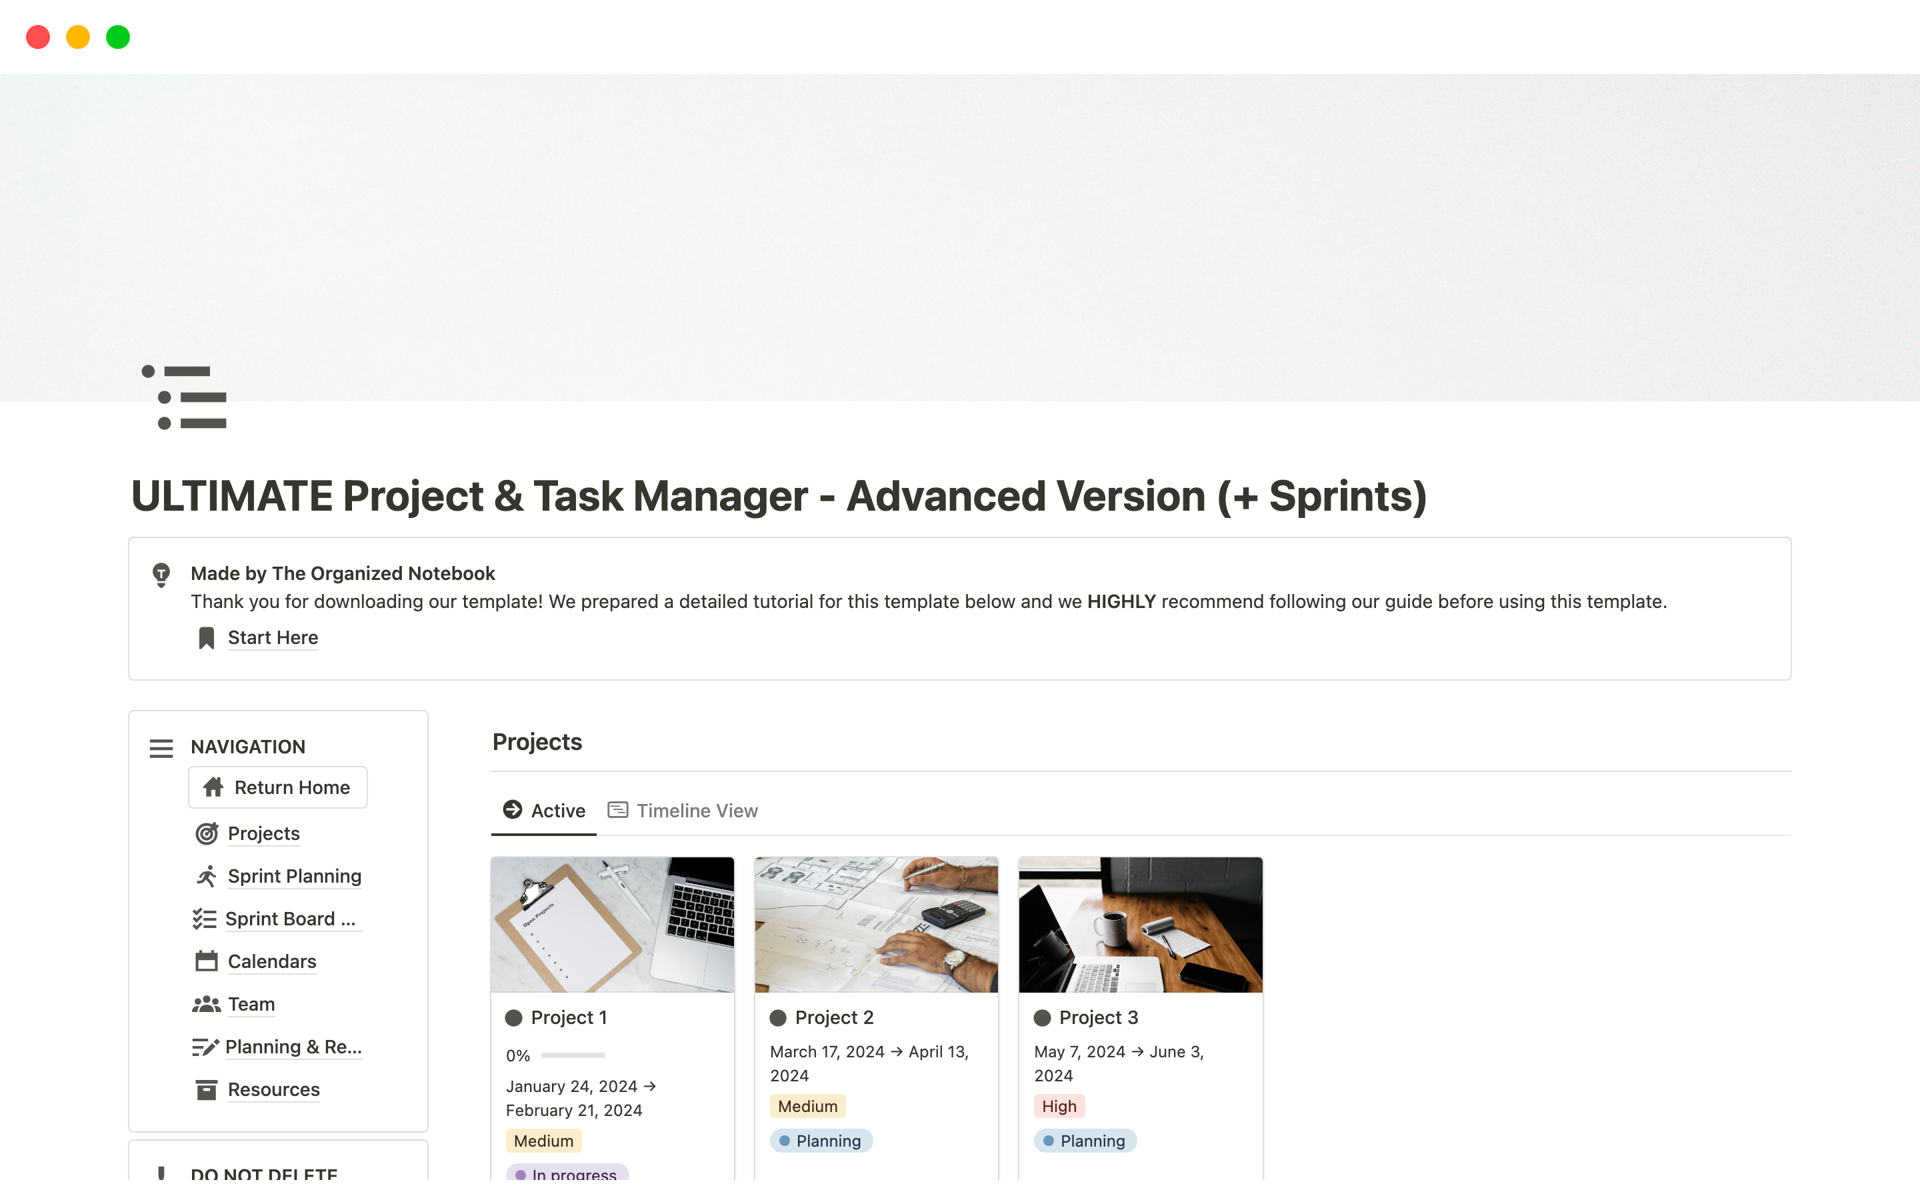 Are you interested in the ULTIMATE project and task manager? This template is designed so that you can go seamlessly from projects, and tasks, to sprints. We also include additional features for planning and review, team pages, calendars, and more! 